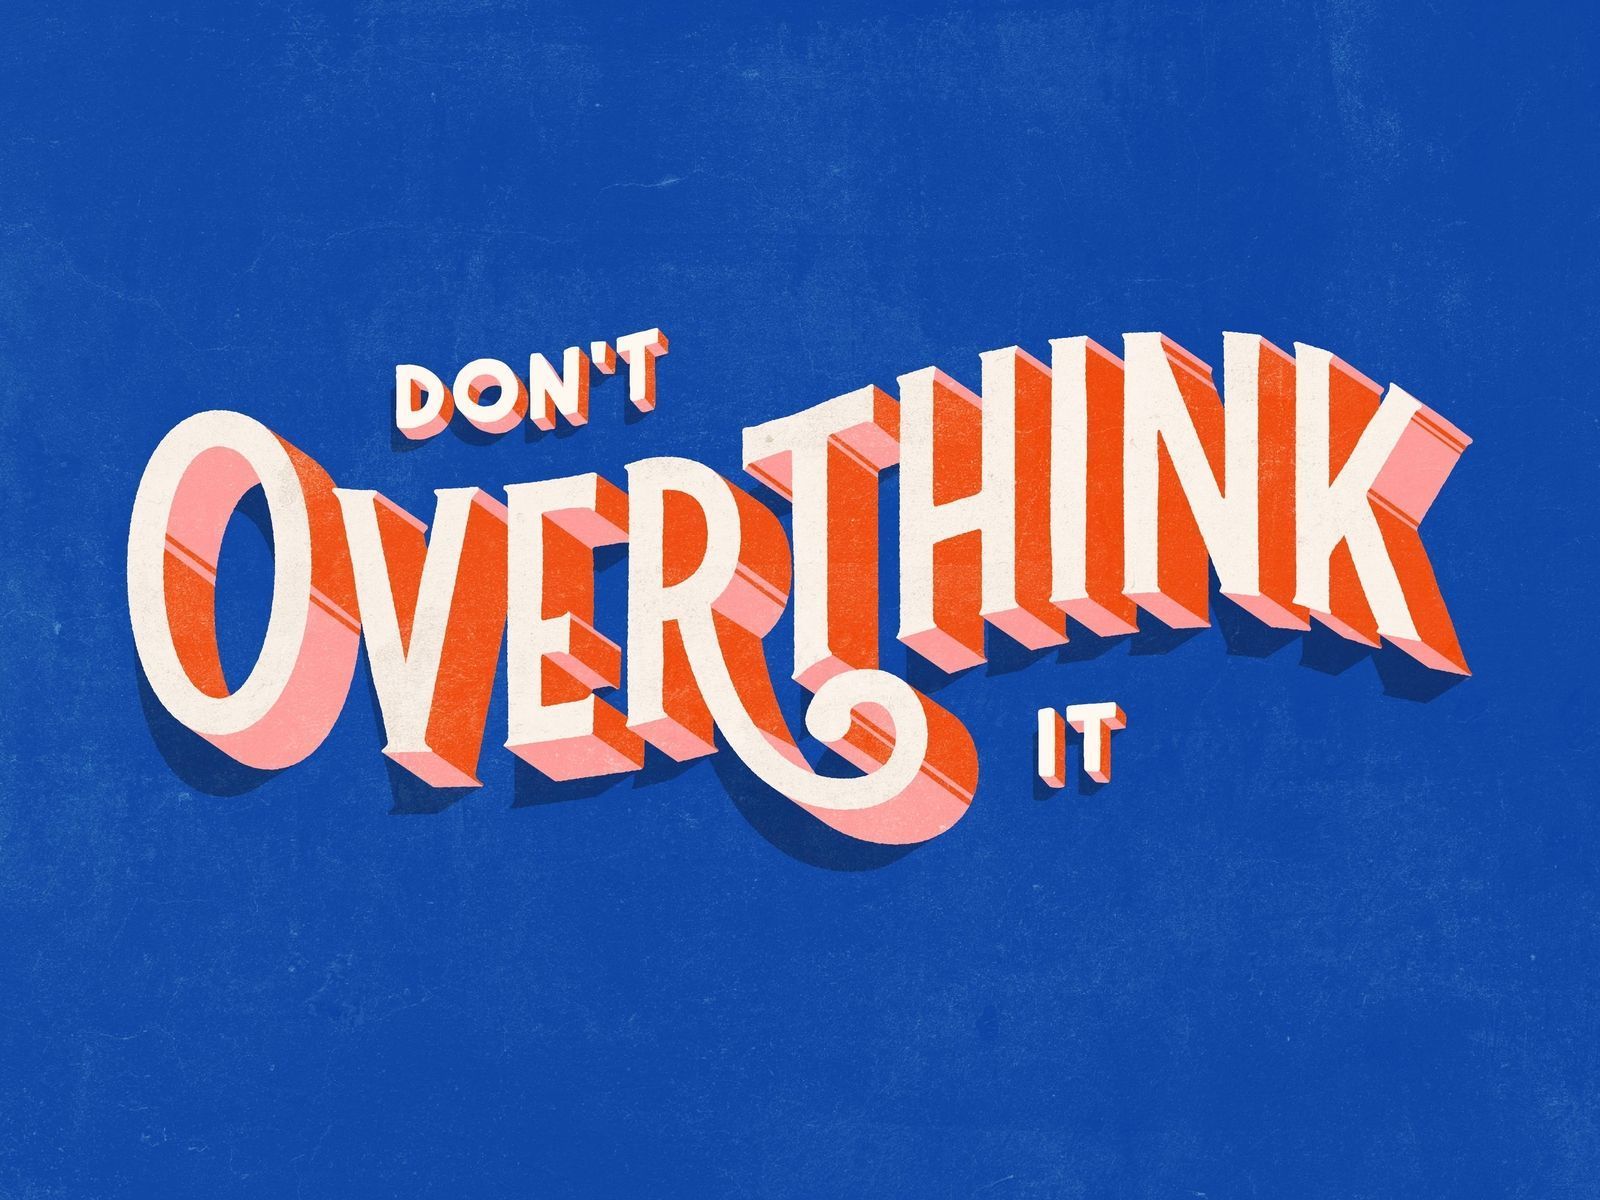 Don't Overthink It. Happy words, Words quotes, Words